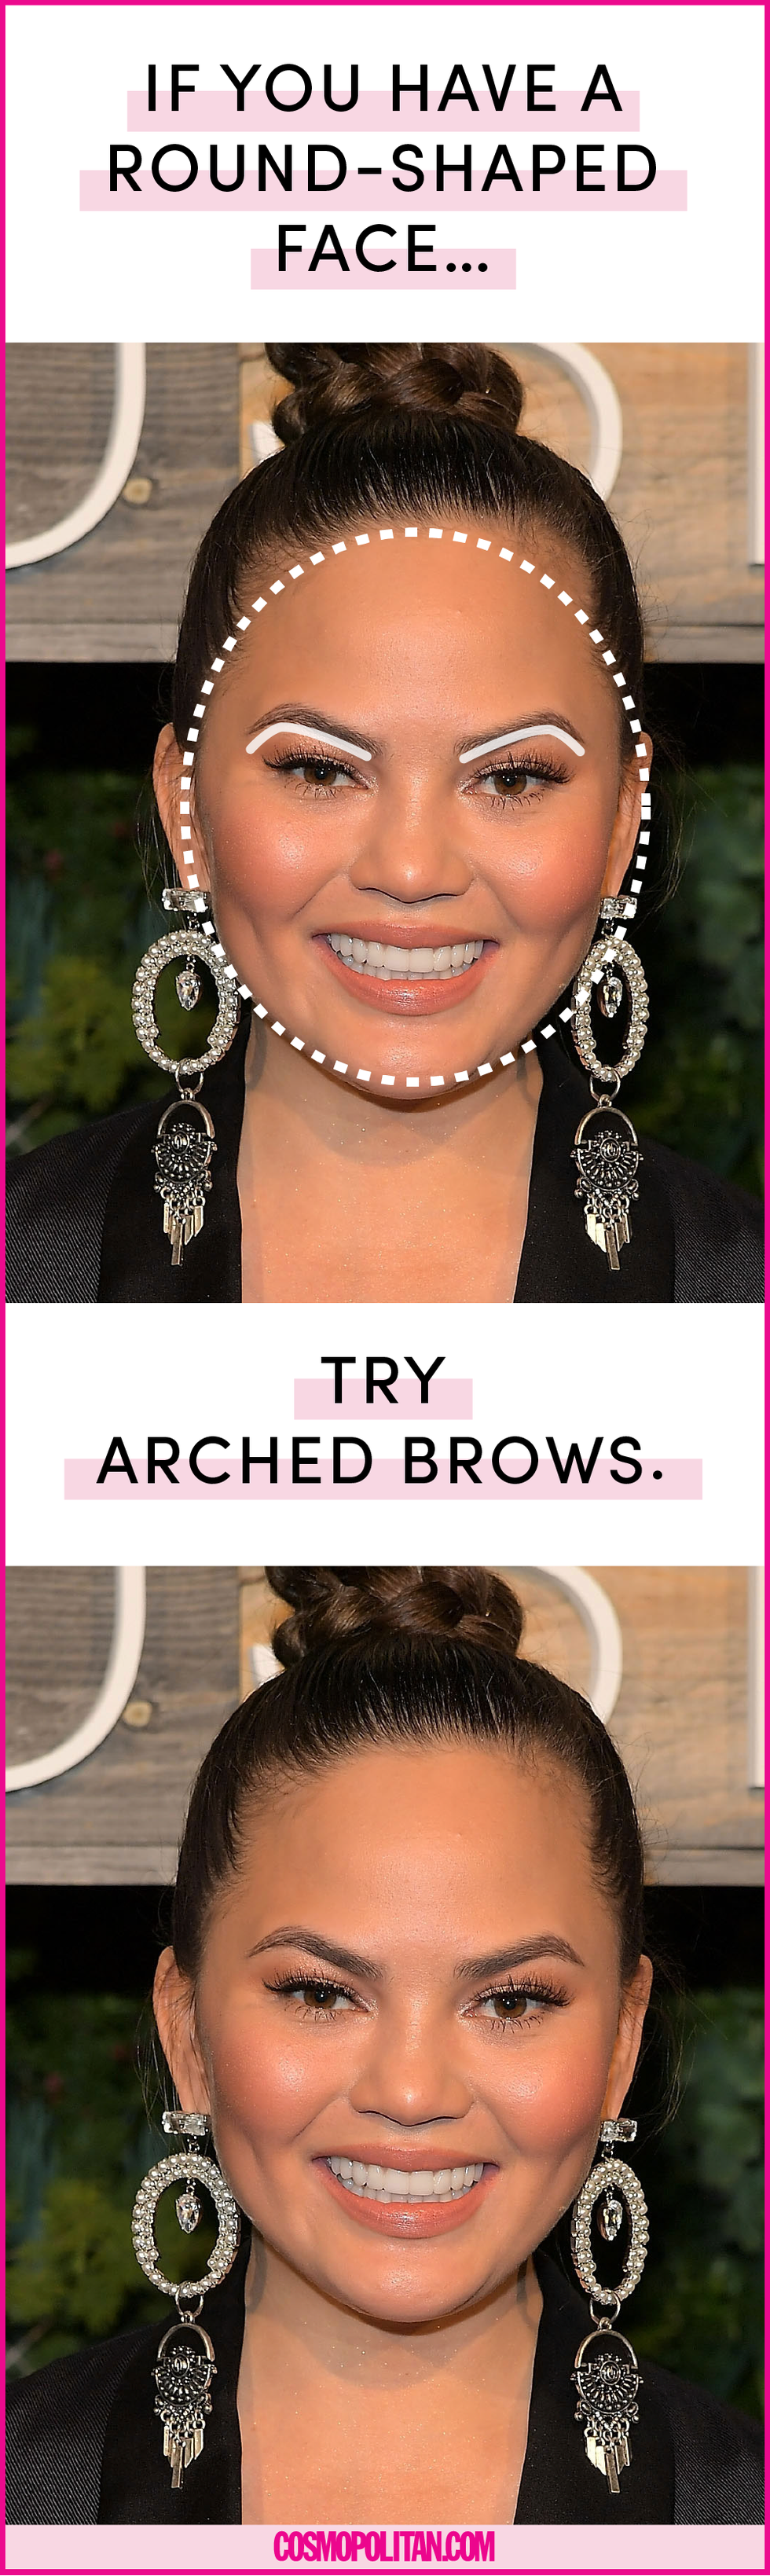 brows for round faces